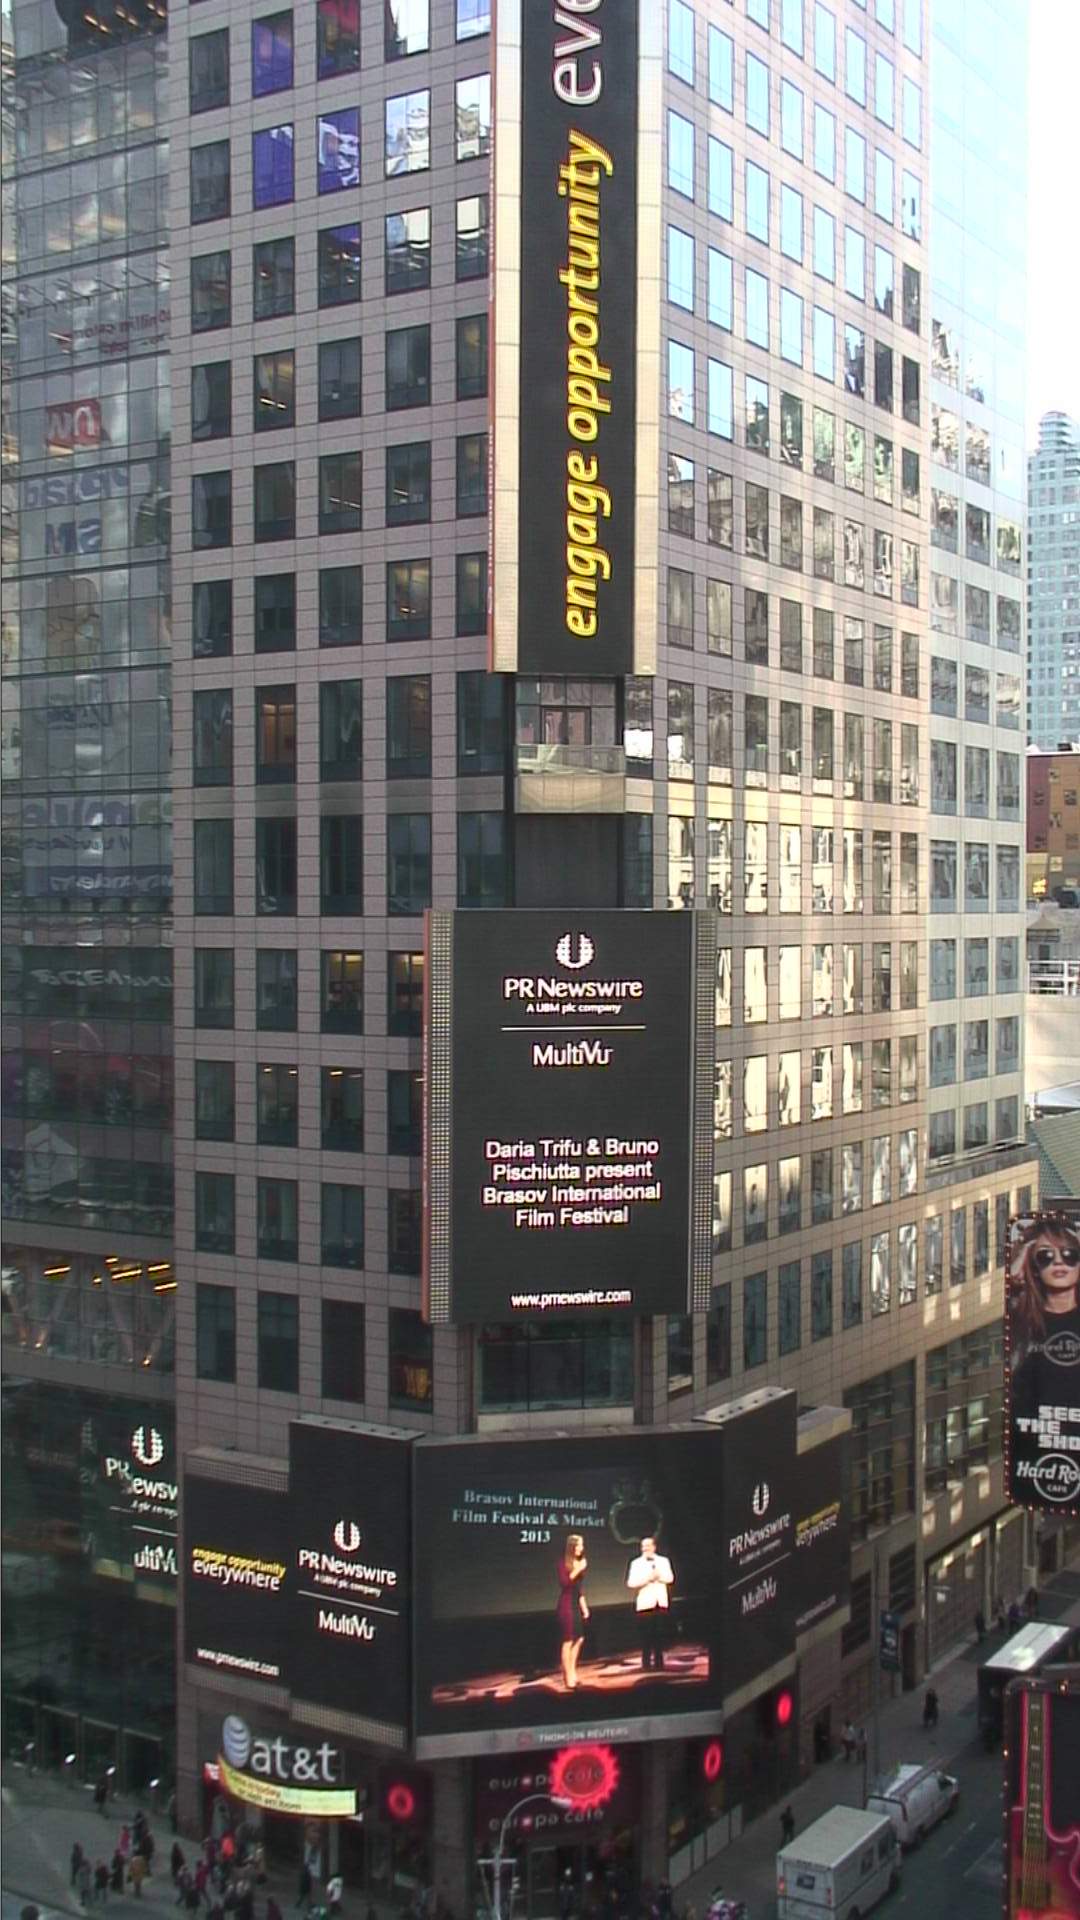 The photo of Bruno Pischiutta and Producer Daria Trifu presenting the Brasov International Film Festival & Market is featured in Times Square, New York City